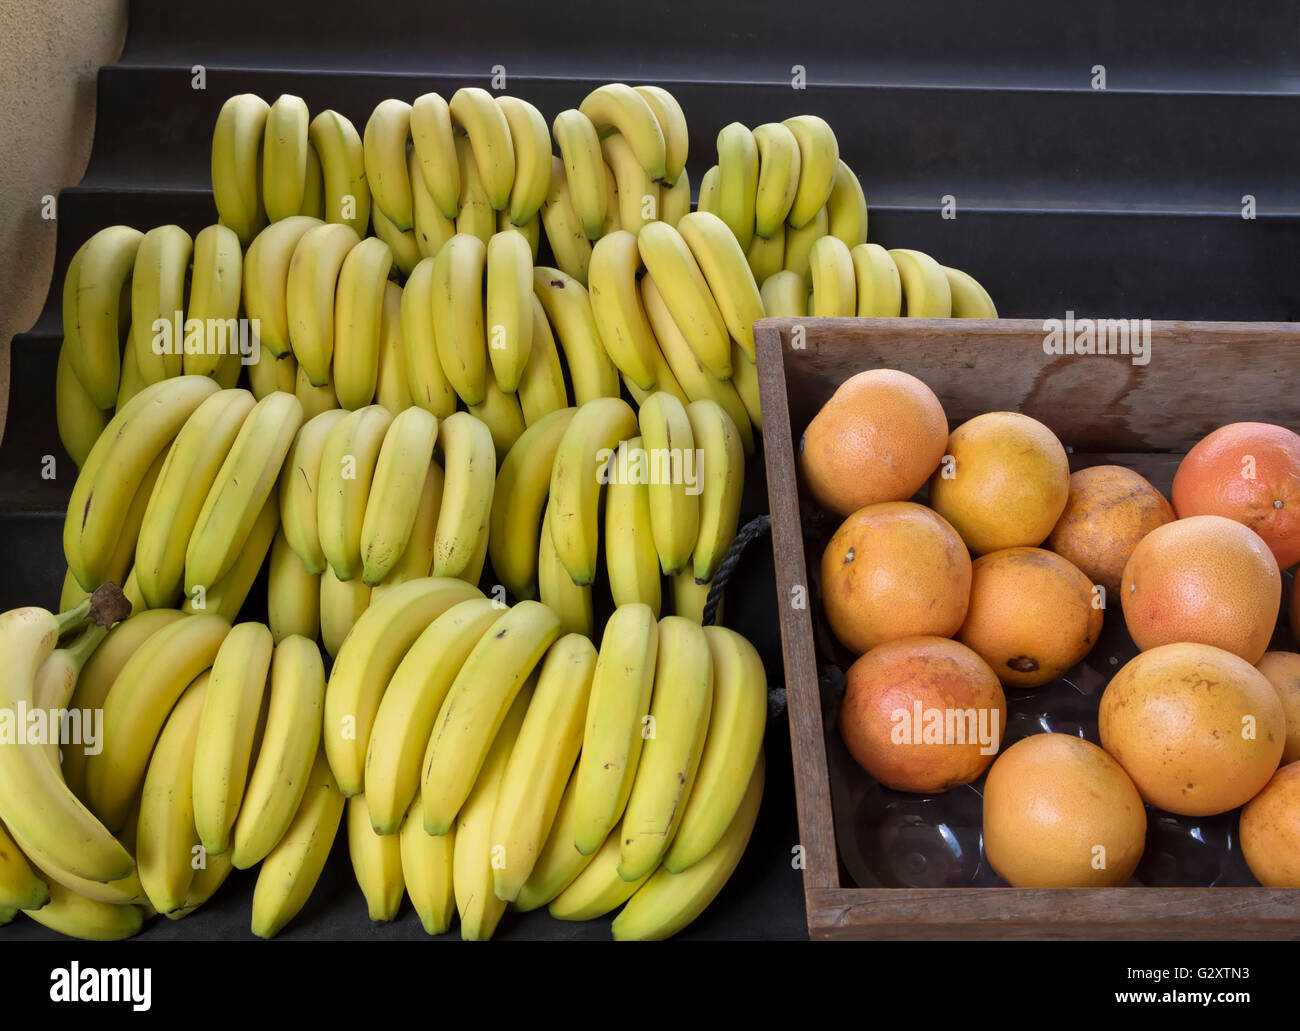 Bananas and grapefruit on display in a market Stock Photo